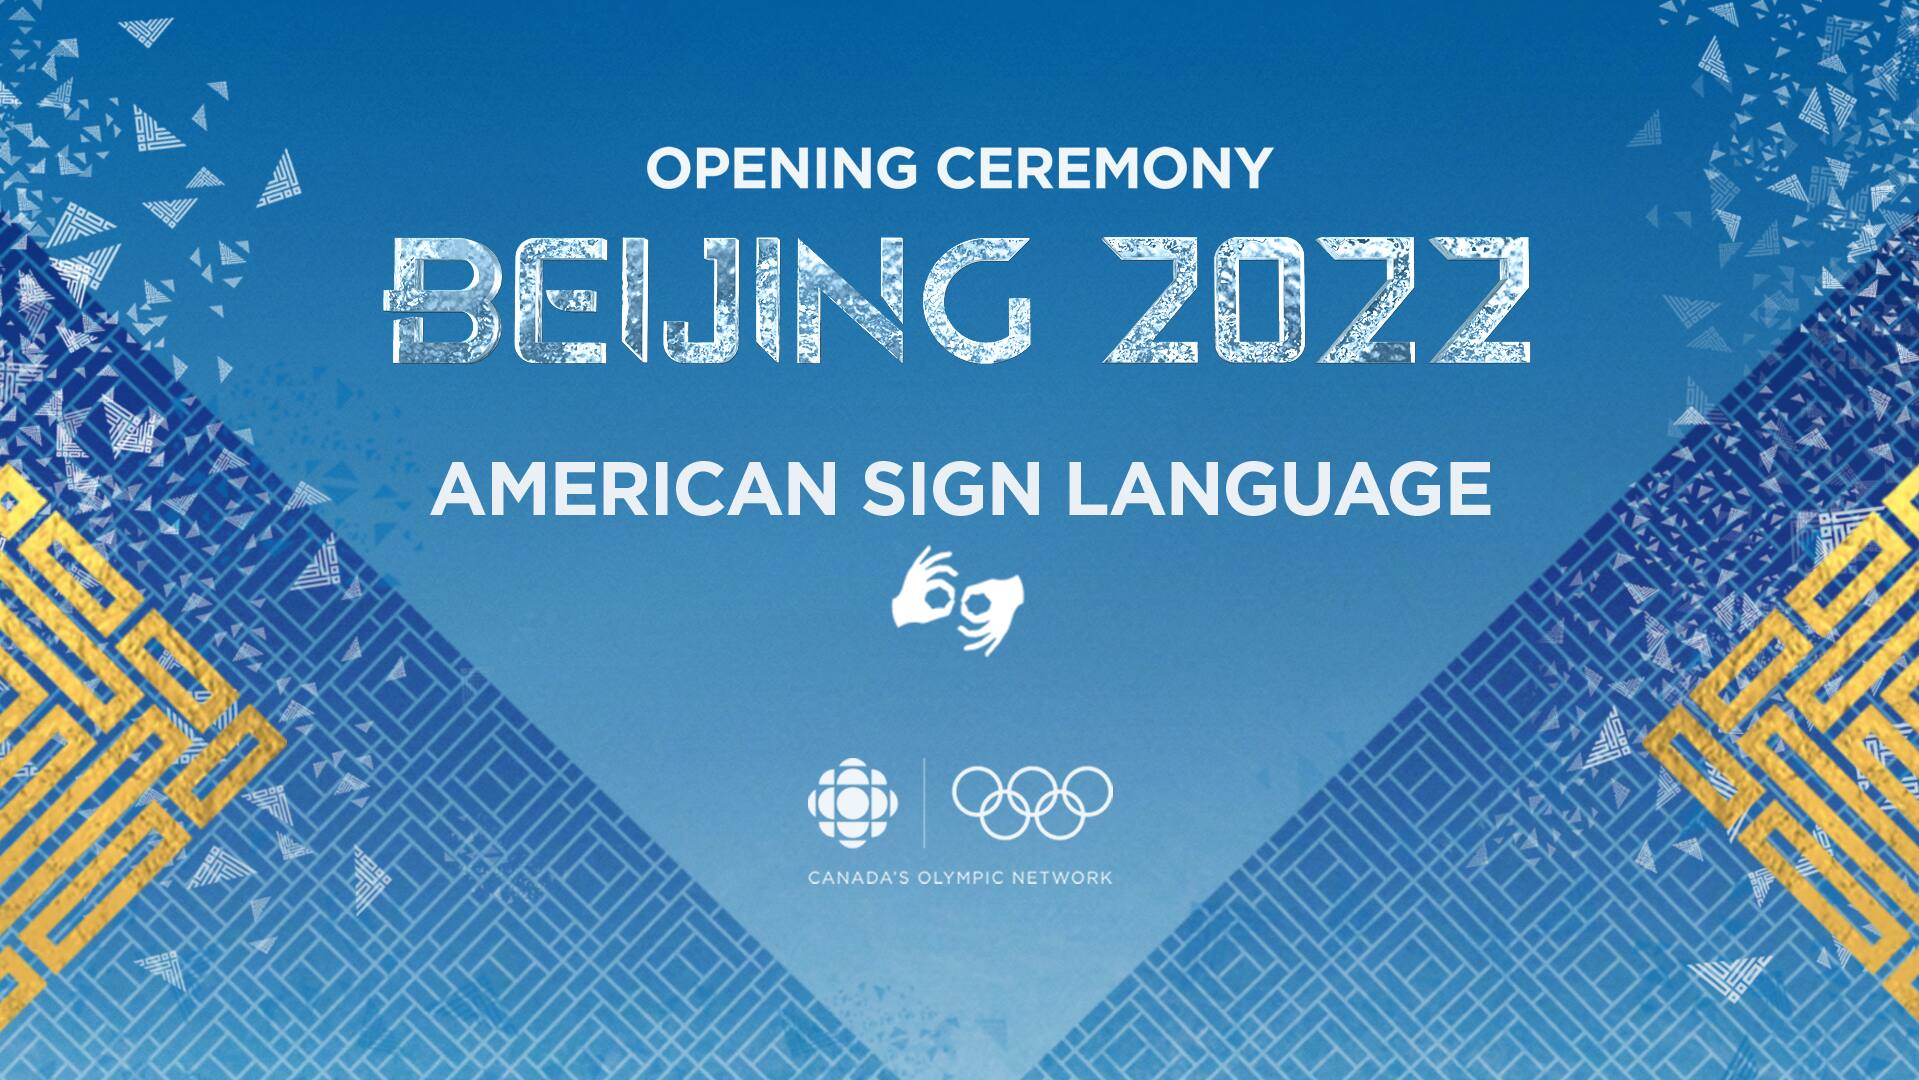 Beijing 2022 officially gets underway Friday with opening ceremony